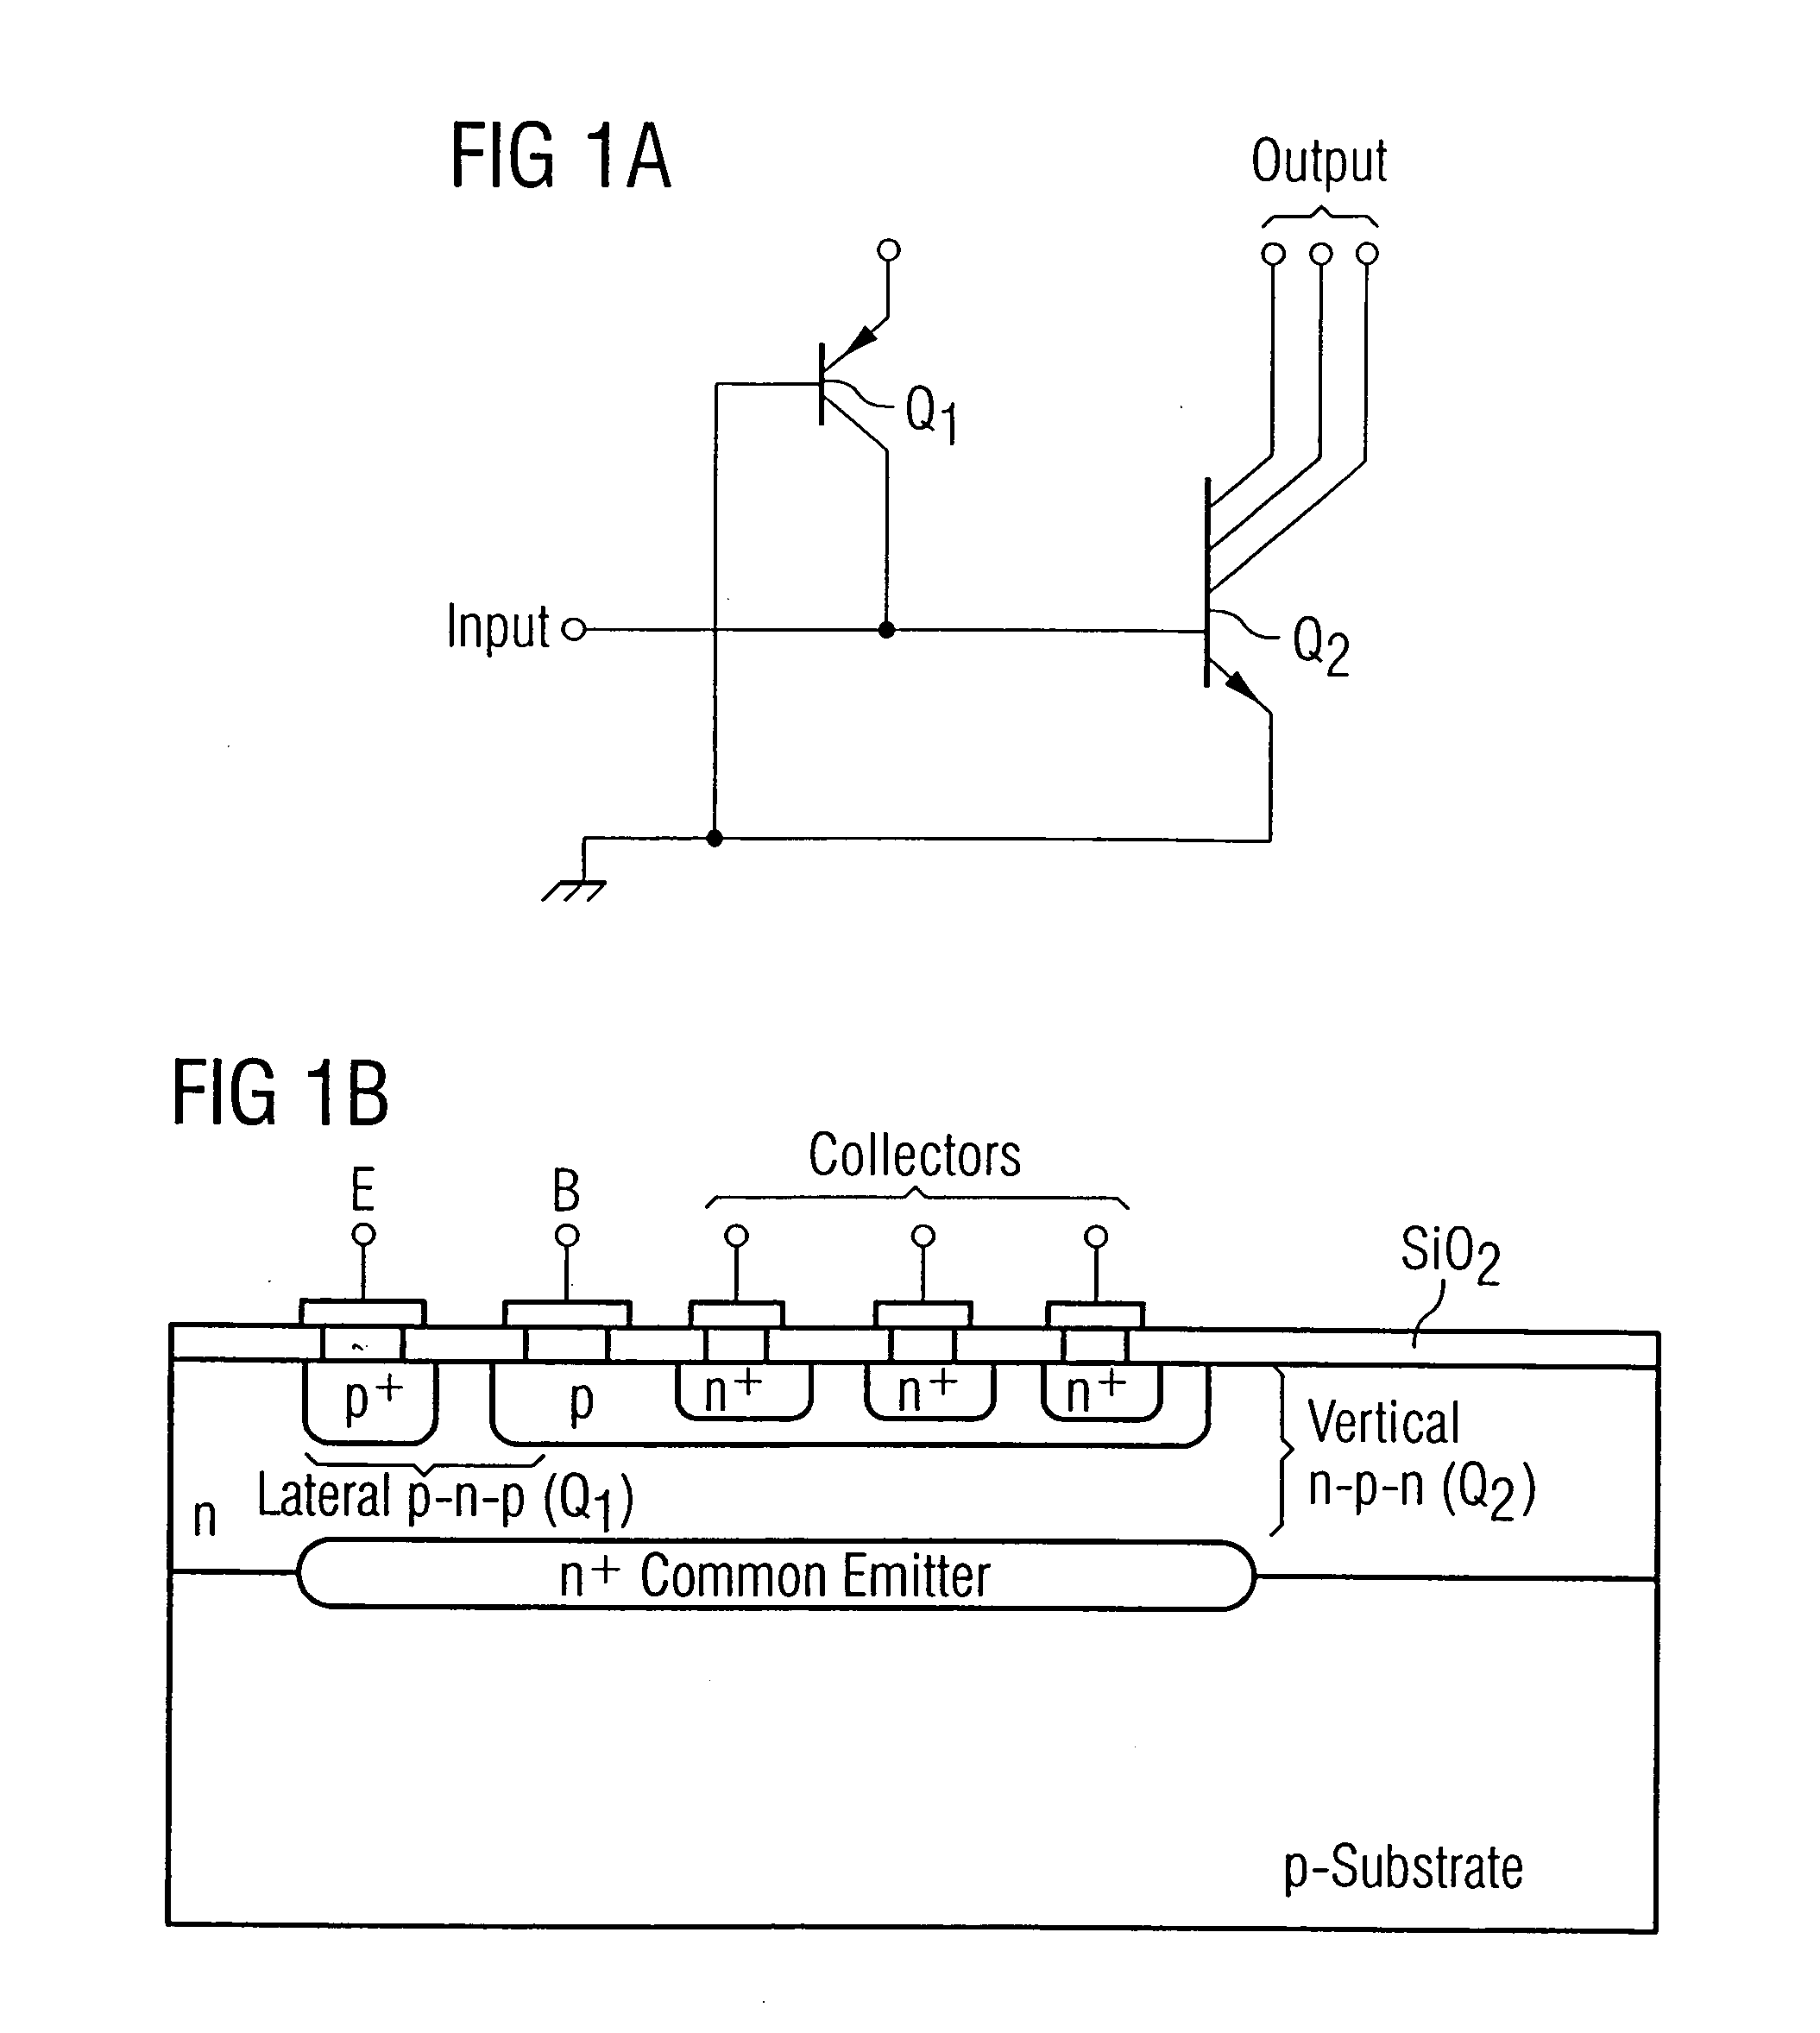 Method in the fabrication of an integrated injection logic circuit